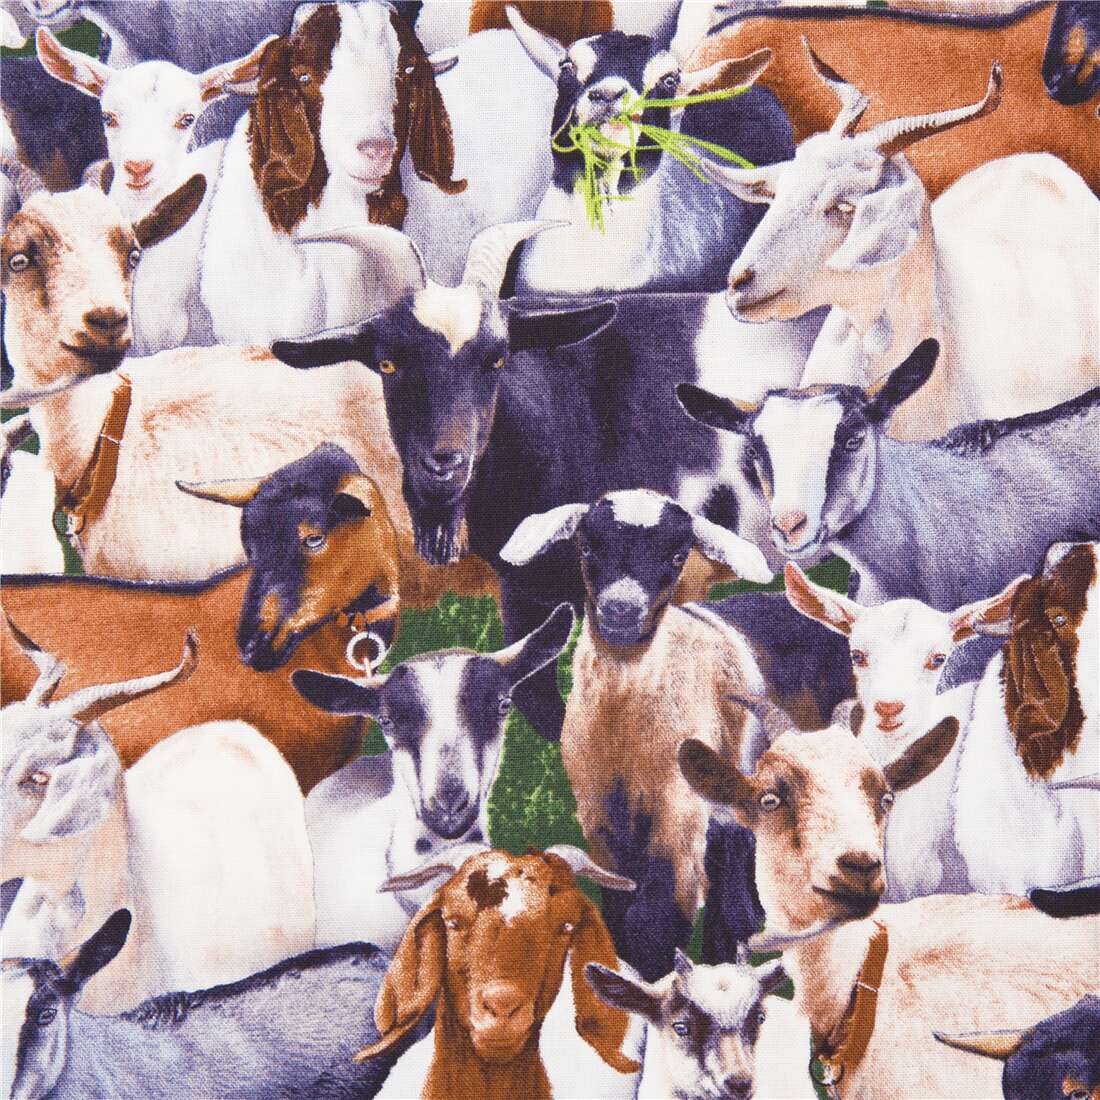 livestock densely packed on grassy background goats cotton fabric farm  animals - modeS4u